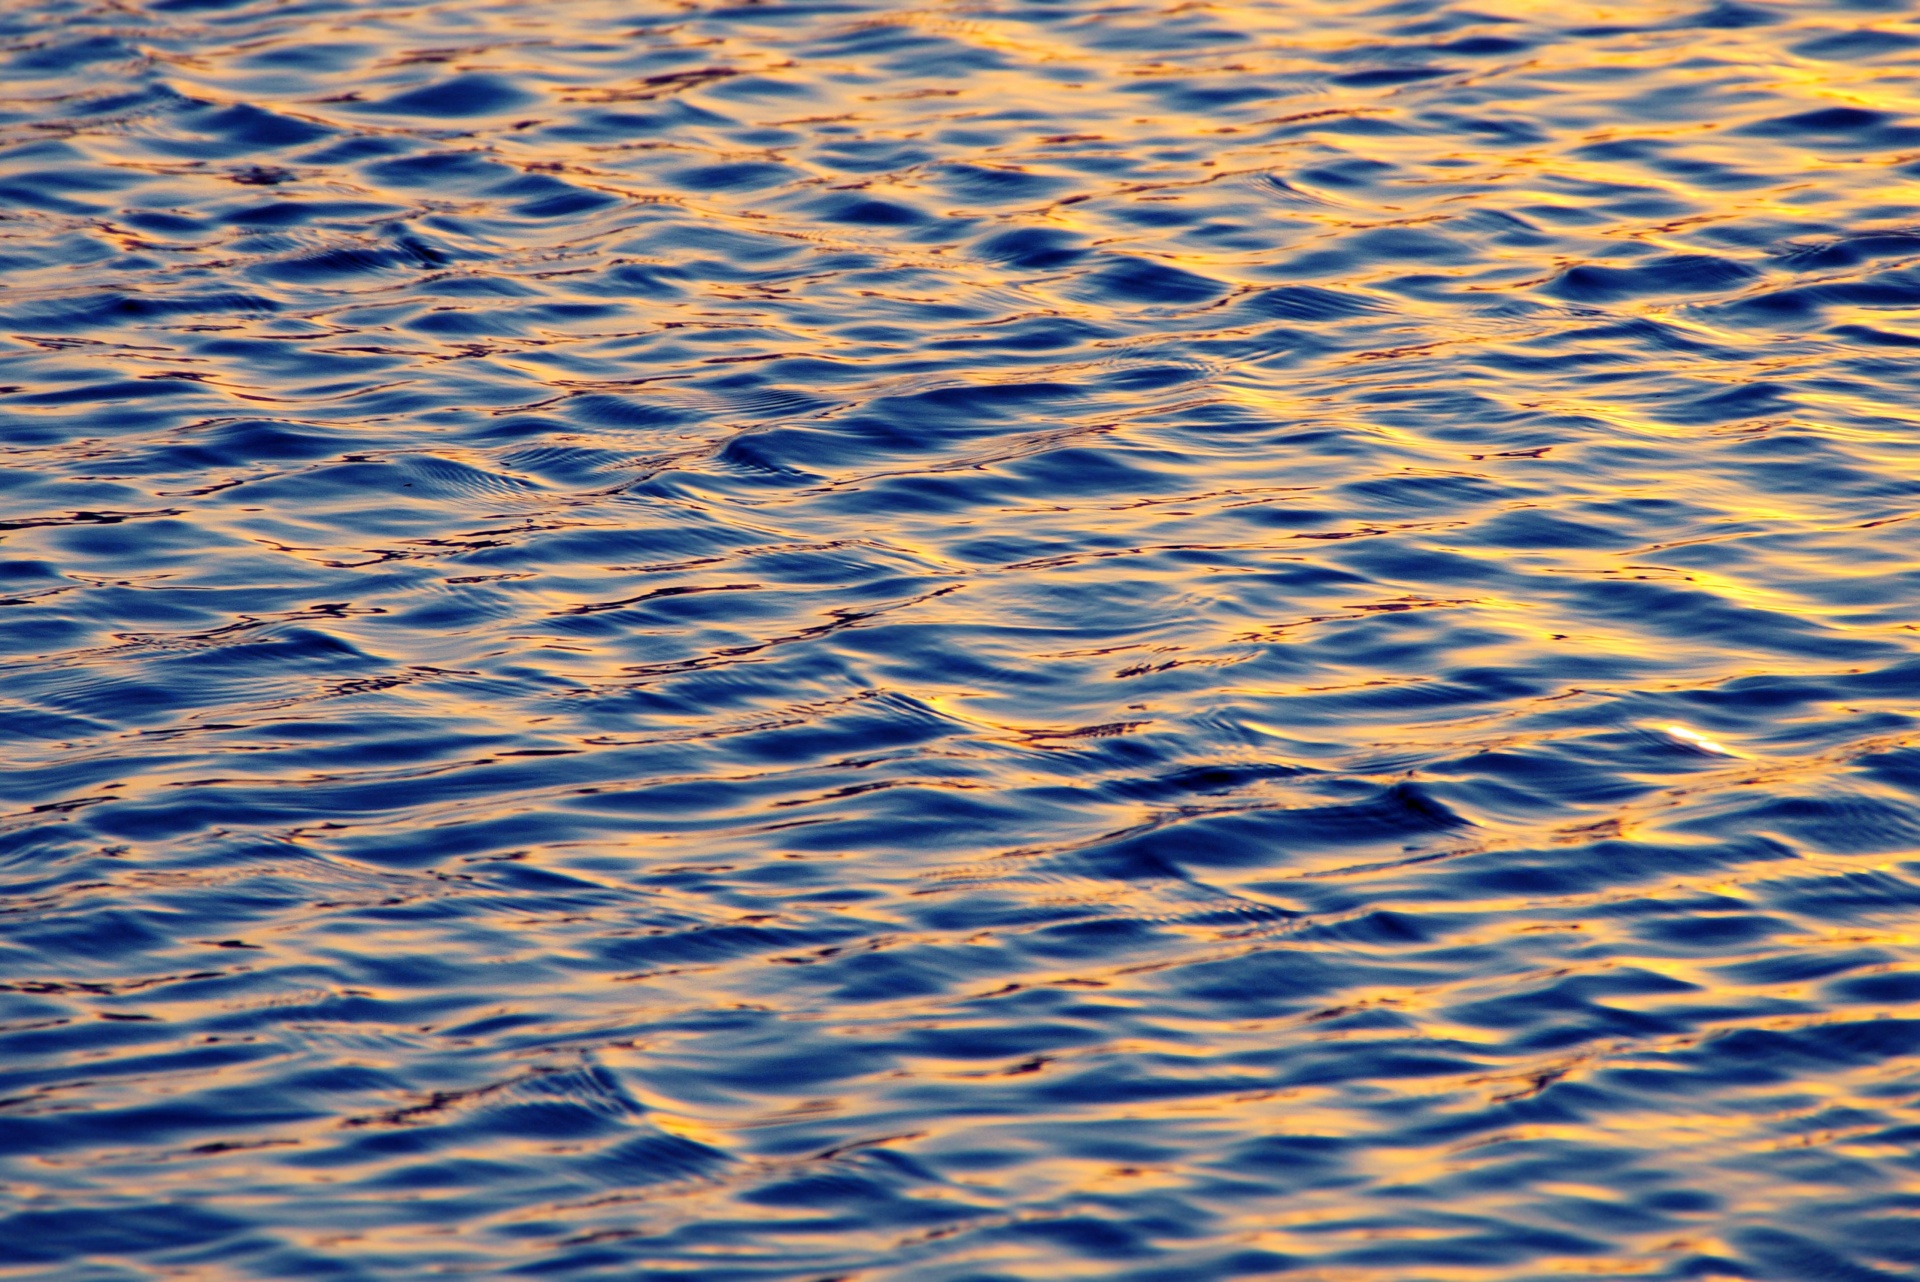 Waves sea waters beautiful reflections of light on the surface nature photography